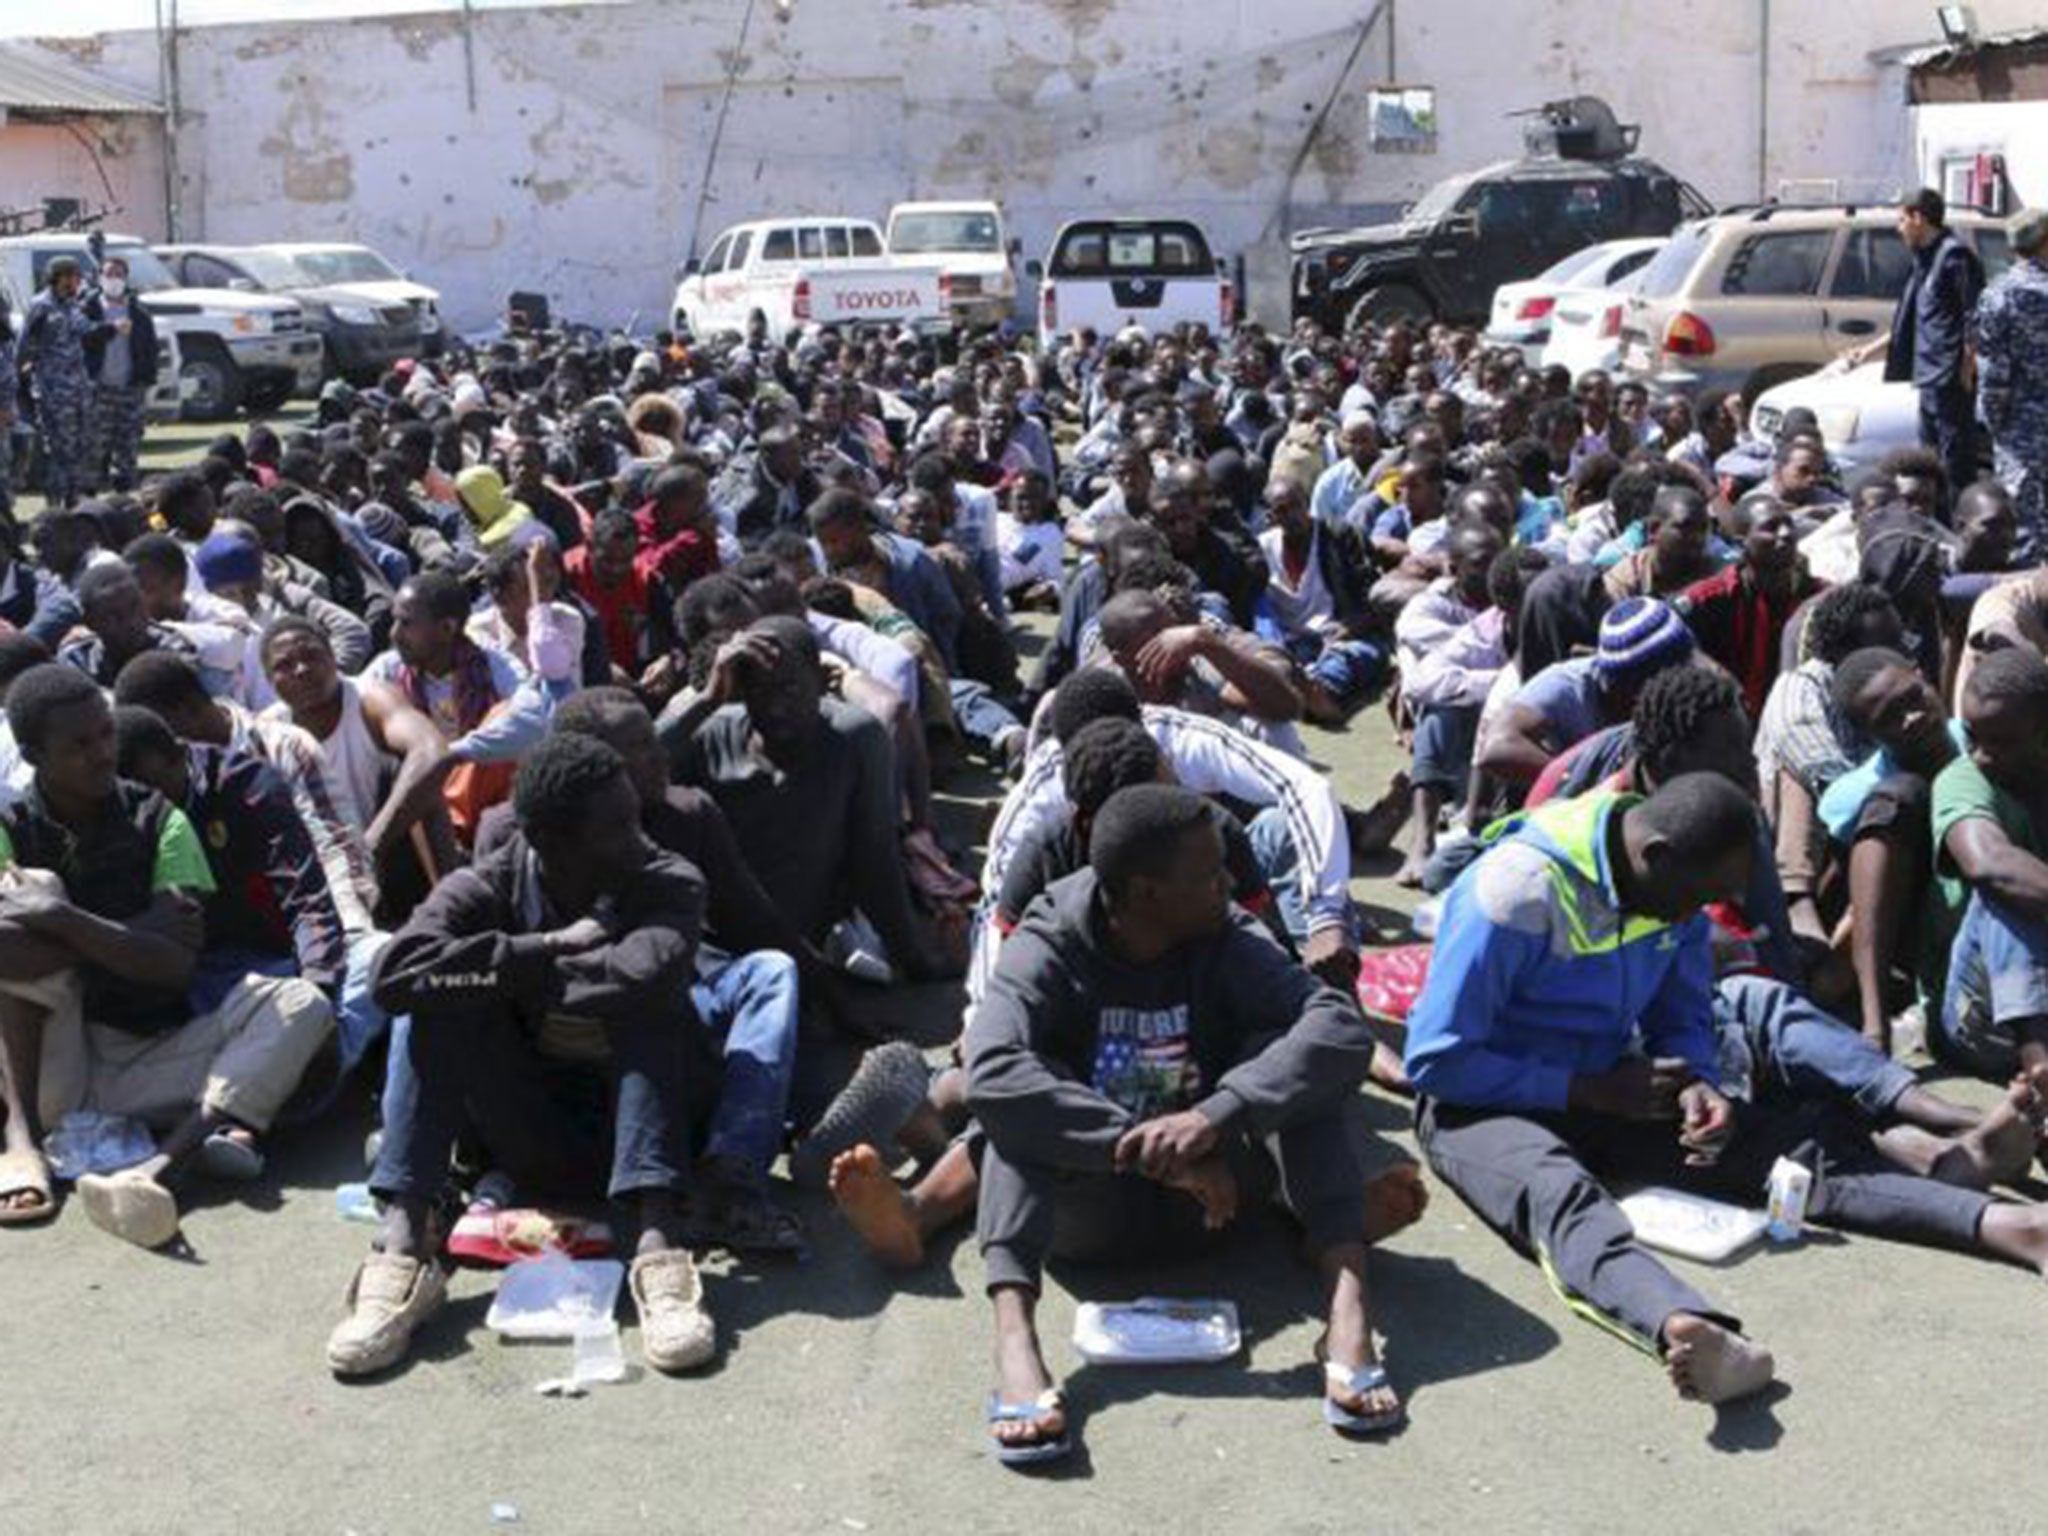 African immigrants in Tripoli after being detained by the Libyan coastguard